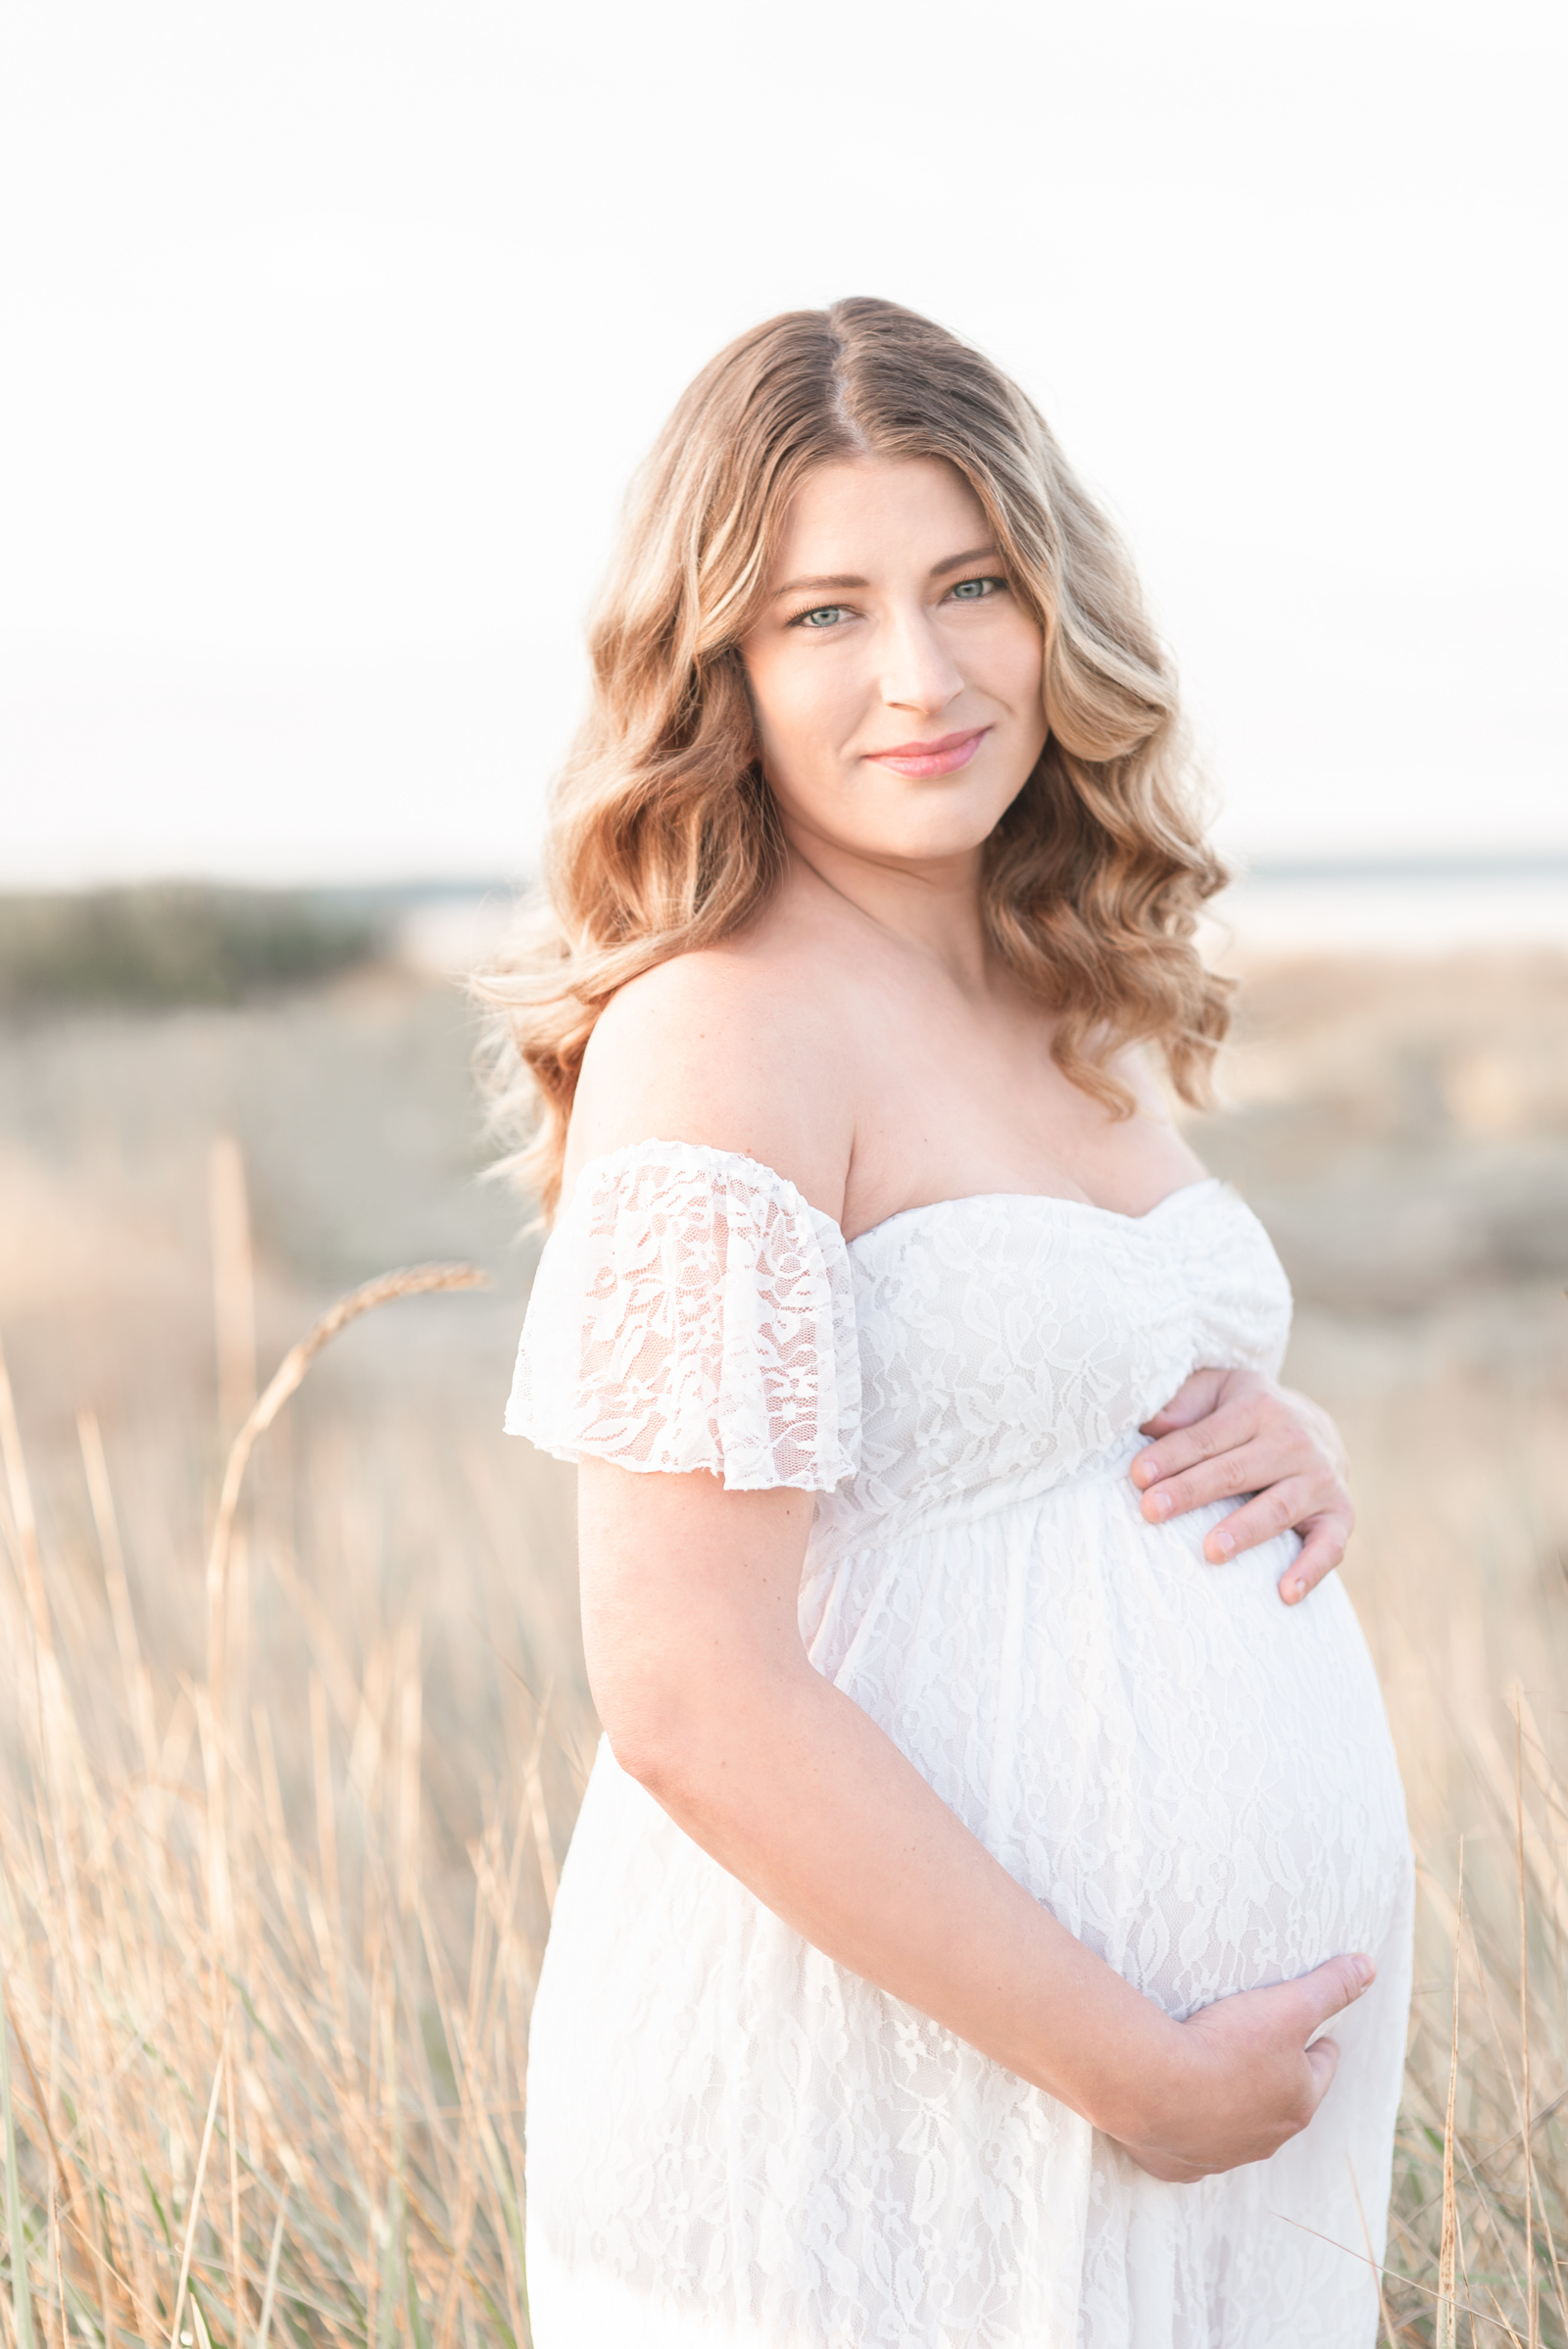 Maternity photos on the sunshine coast bc in a field.